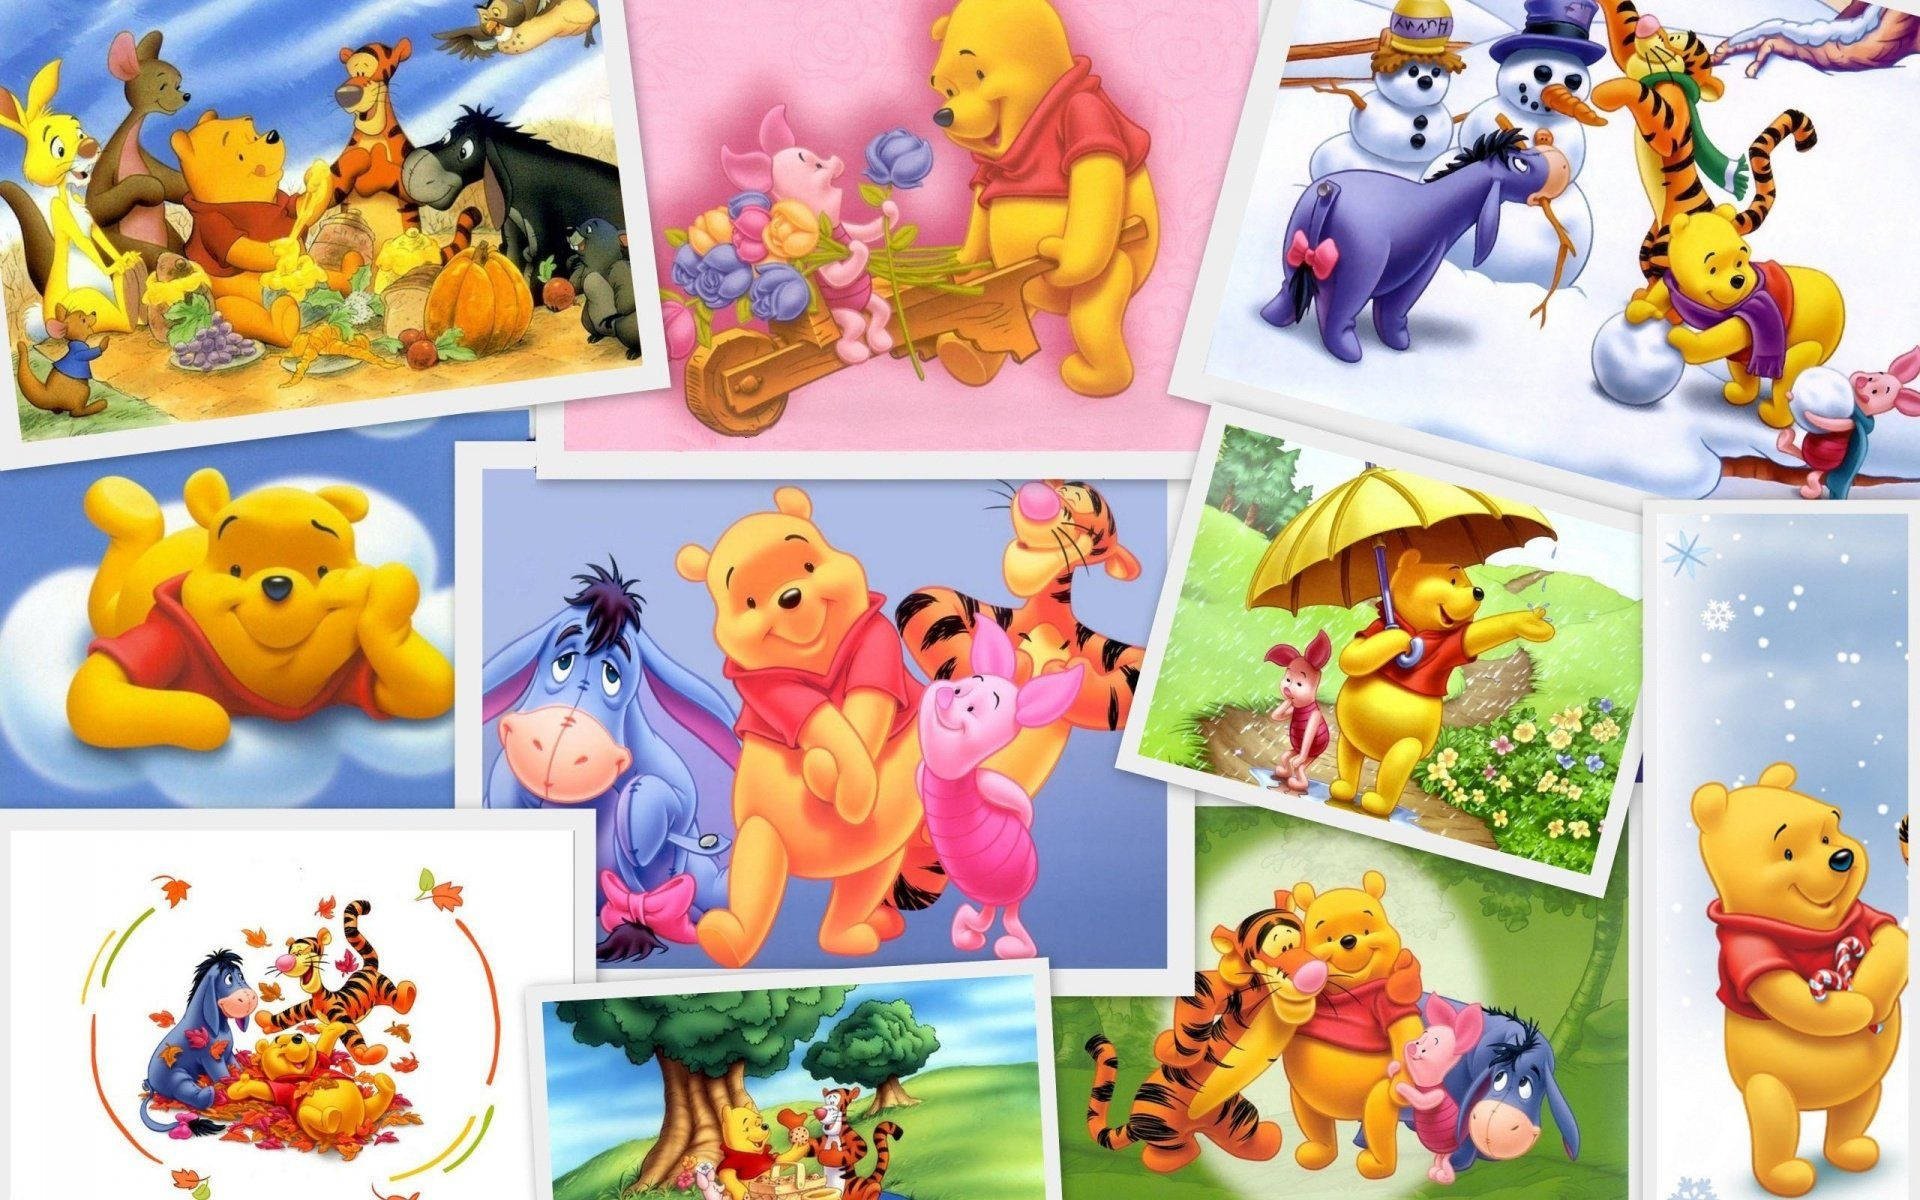 Winnie the Pooh enjoying a relaxed picnic with Tigger Wallpaper